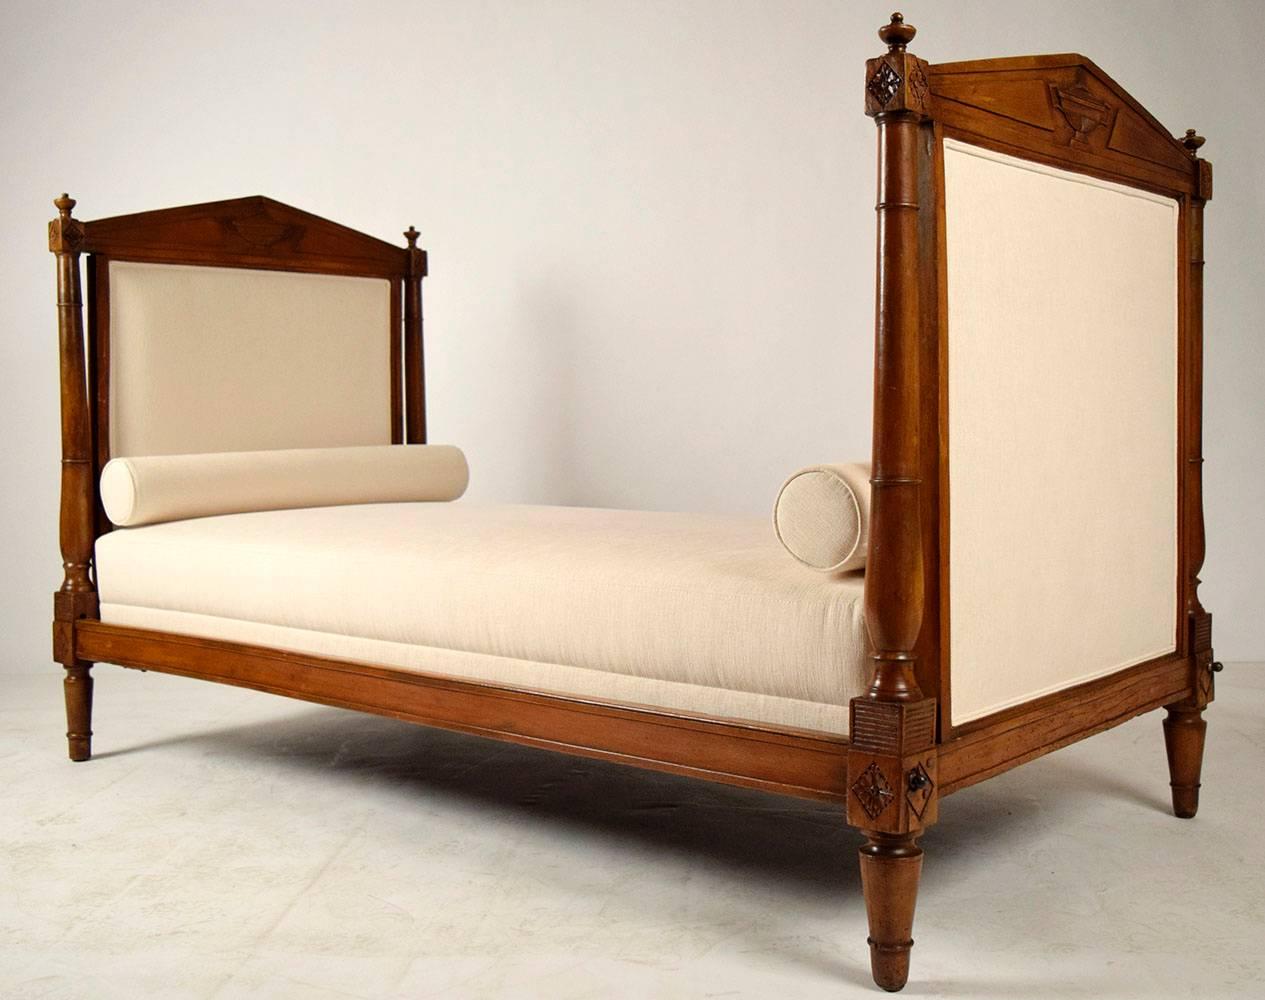 1860s mid-19th century Empire daybed. Walnut wood frame with original light walnut finish, showing beautiful patina. Headboard, headboards have been professionally upholstered in a ivory color fabric, comes with a new mattress and two booster